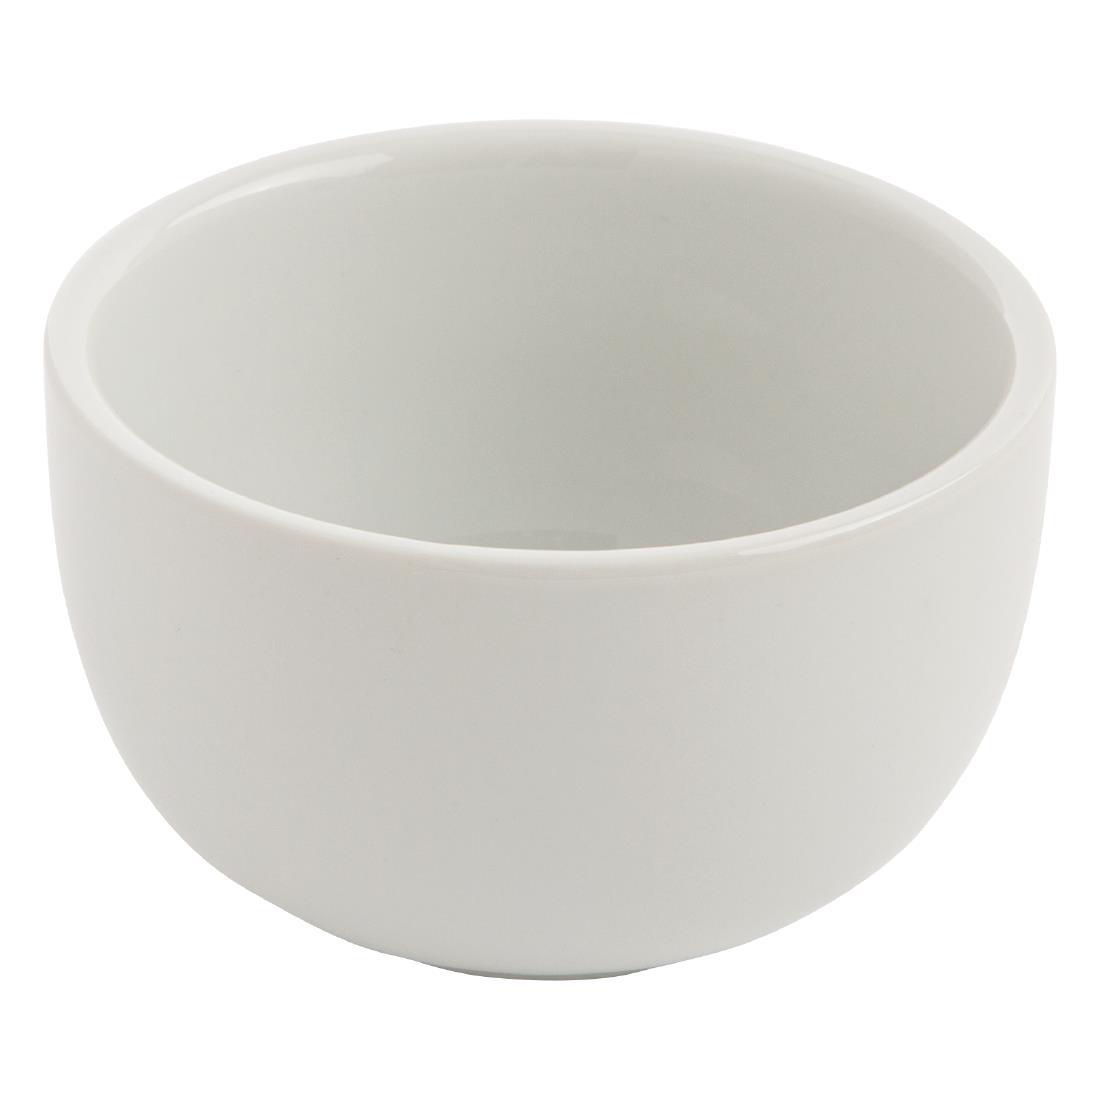 Olympia Whiteware Sugar Bowls 95mm 200ml (Pack of 12) - C250  - 2